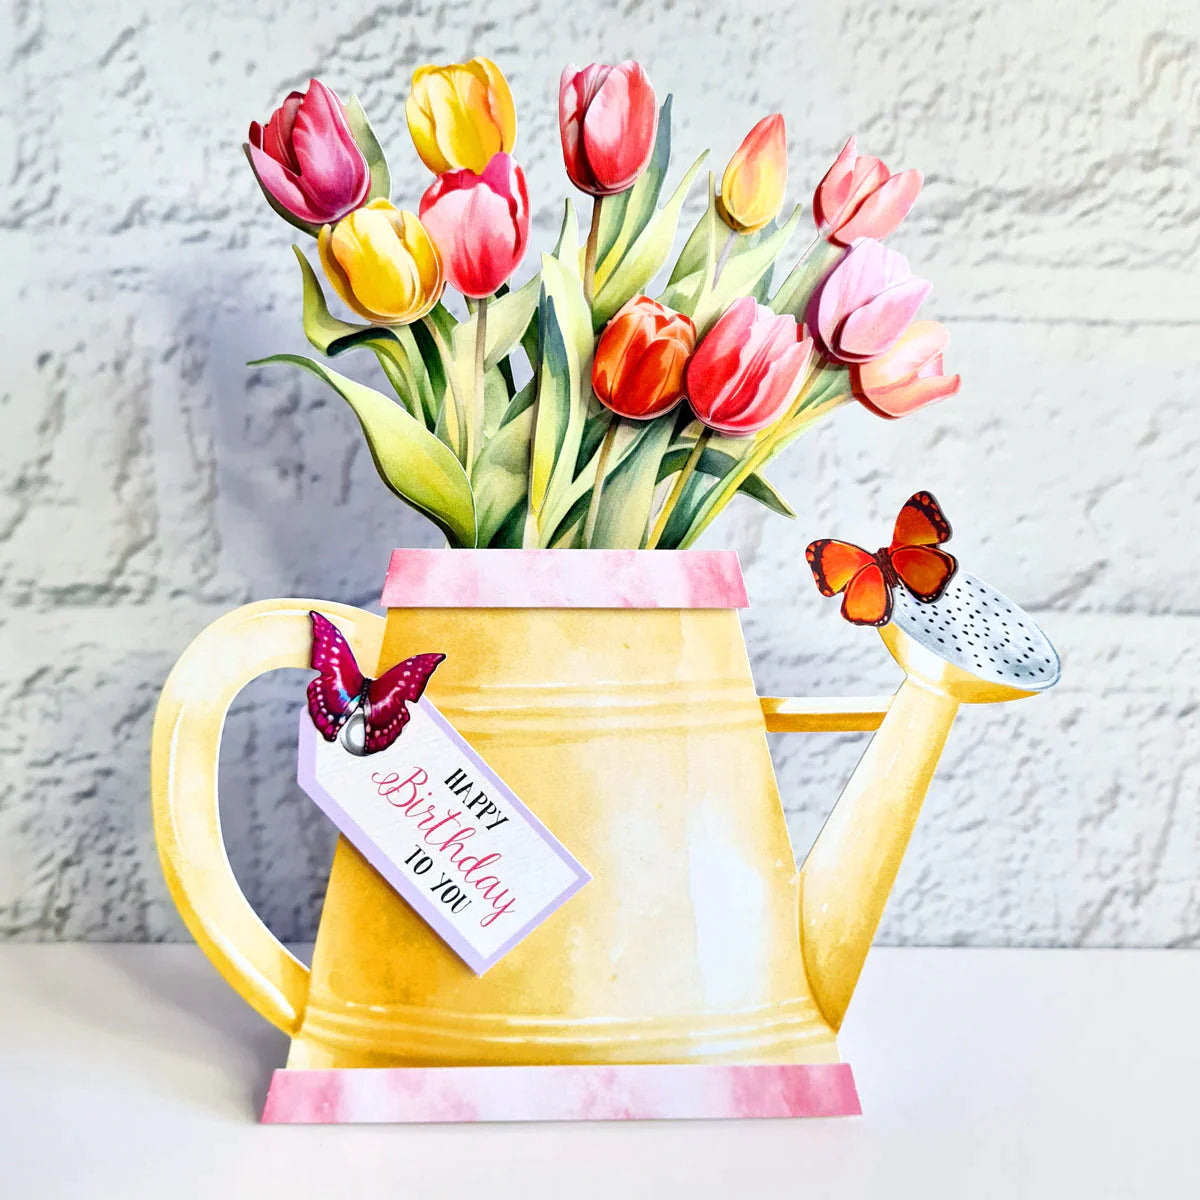 Watering Can Blossoms and Blooms, Card Making Kit